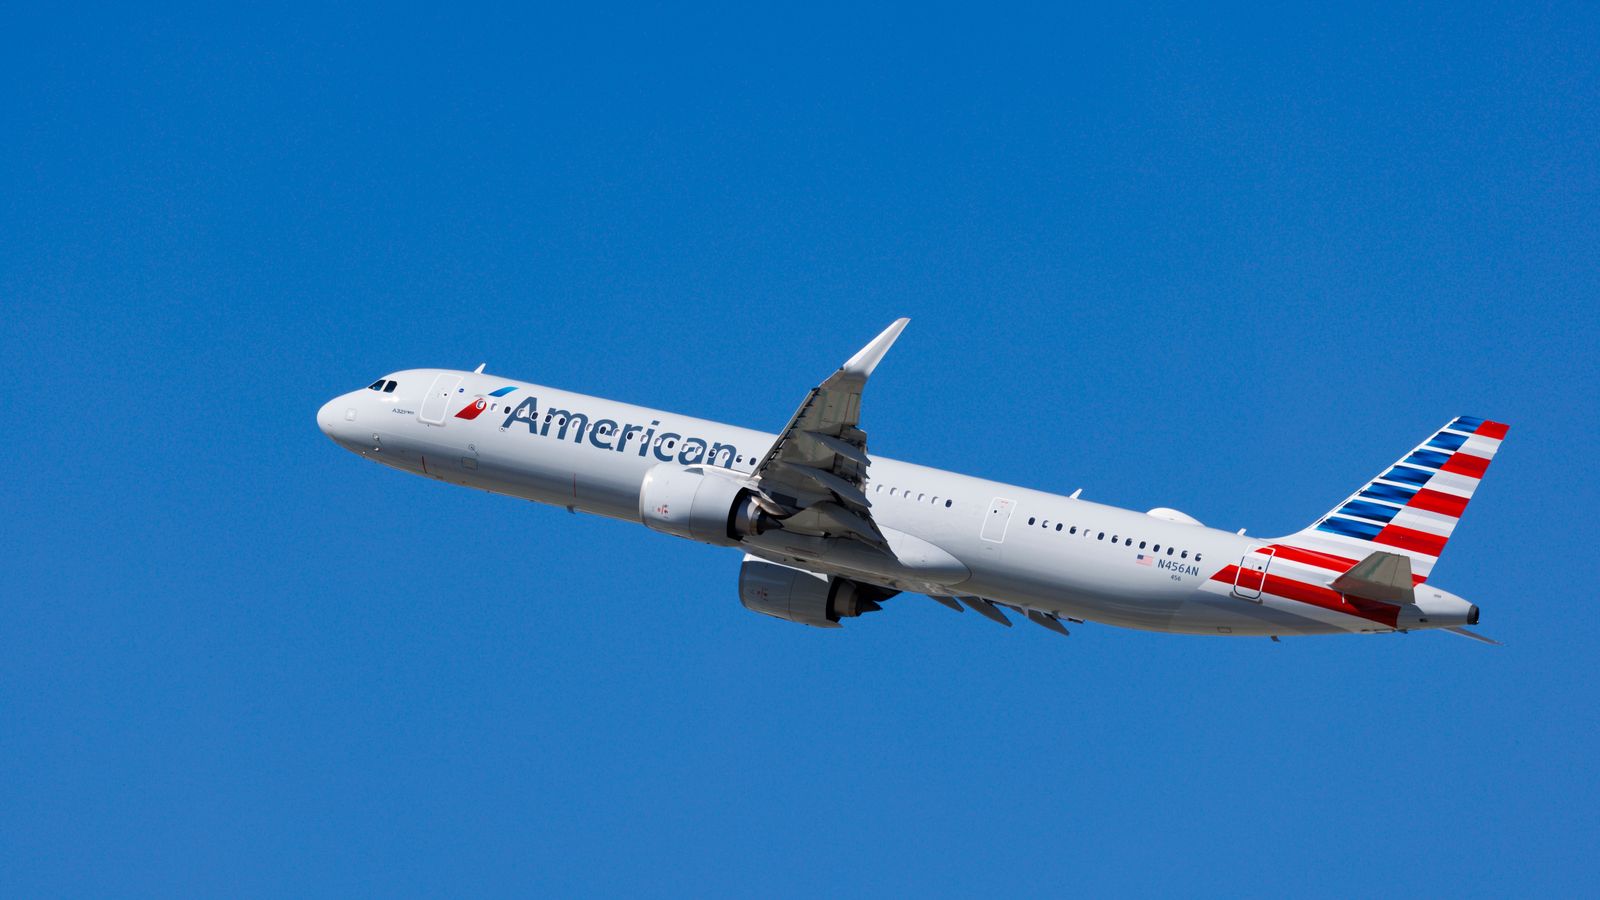 American Airlines plane engine catches fire after bird strike